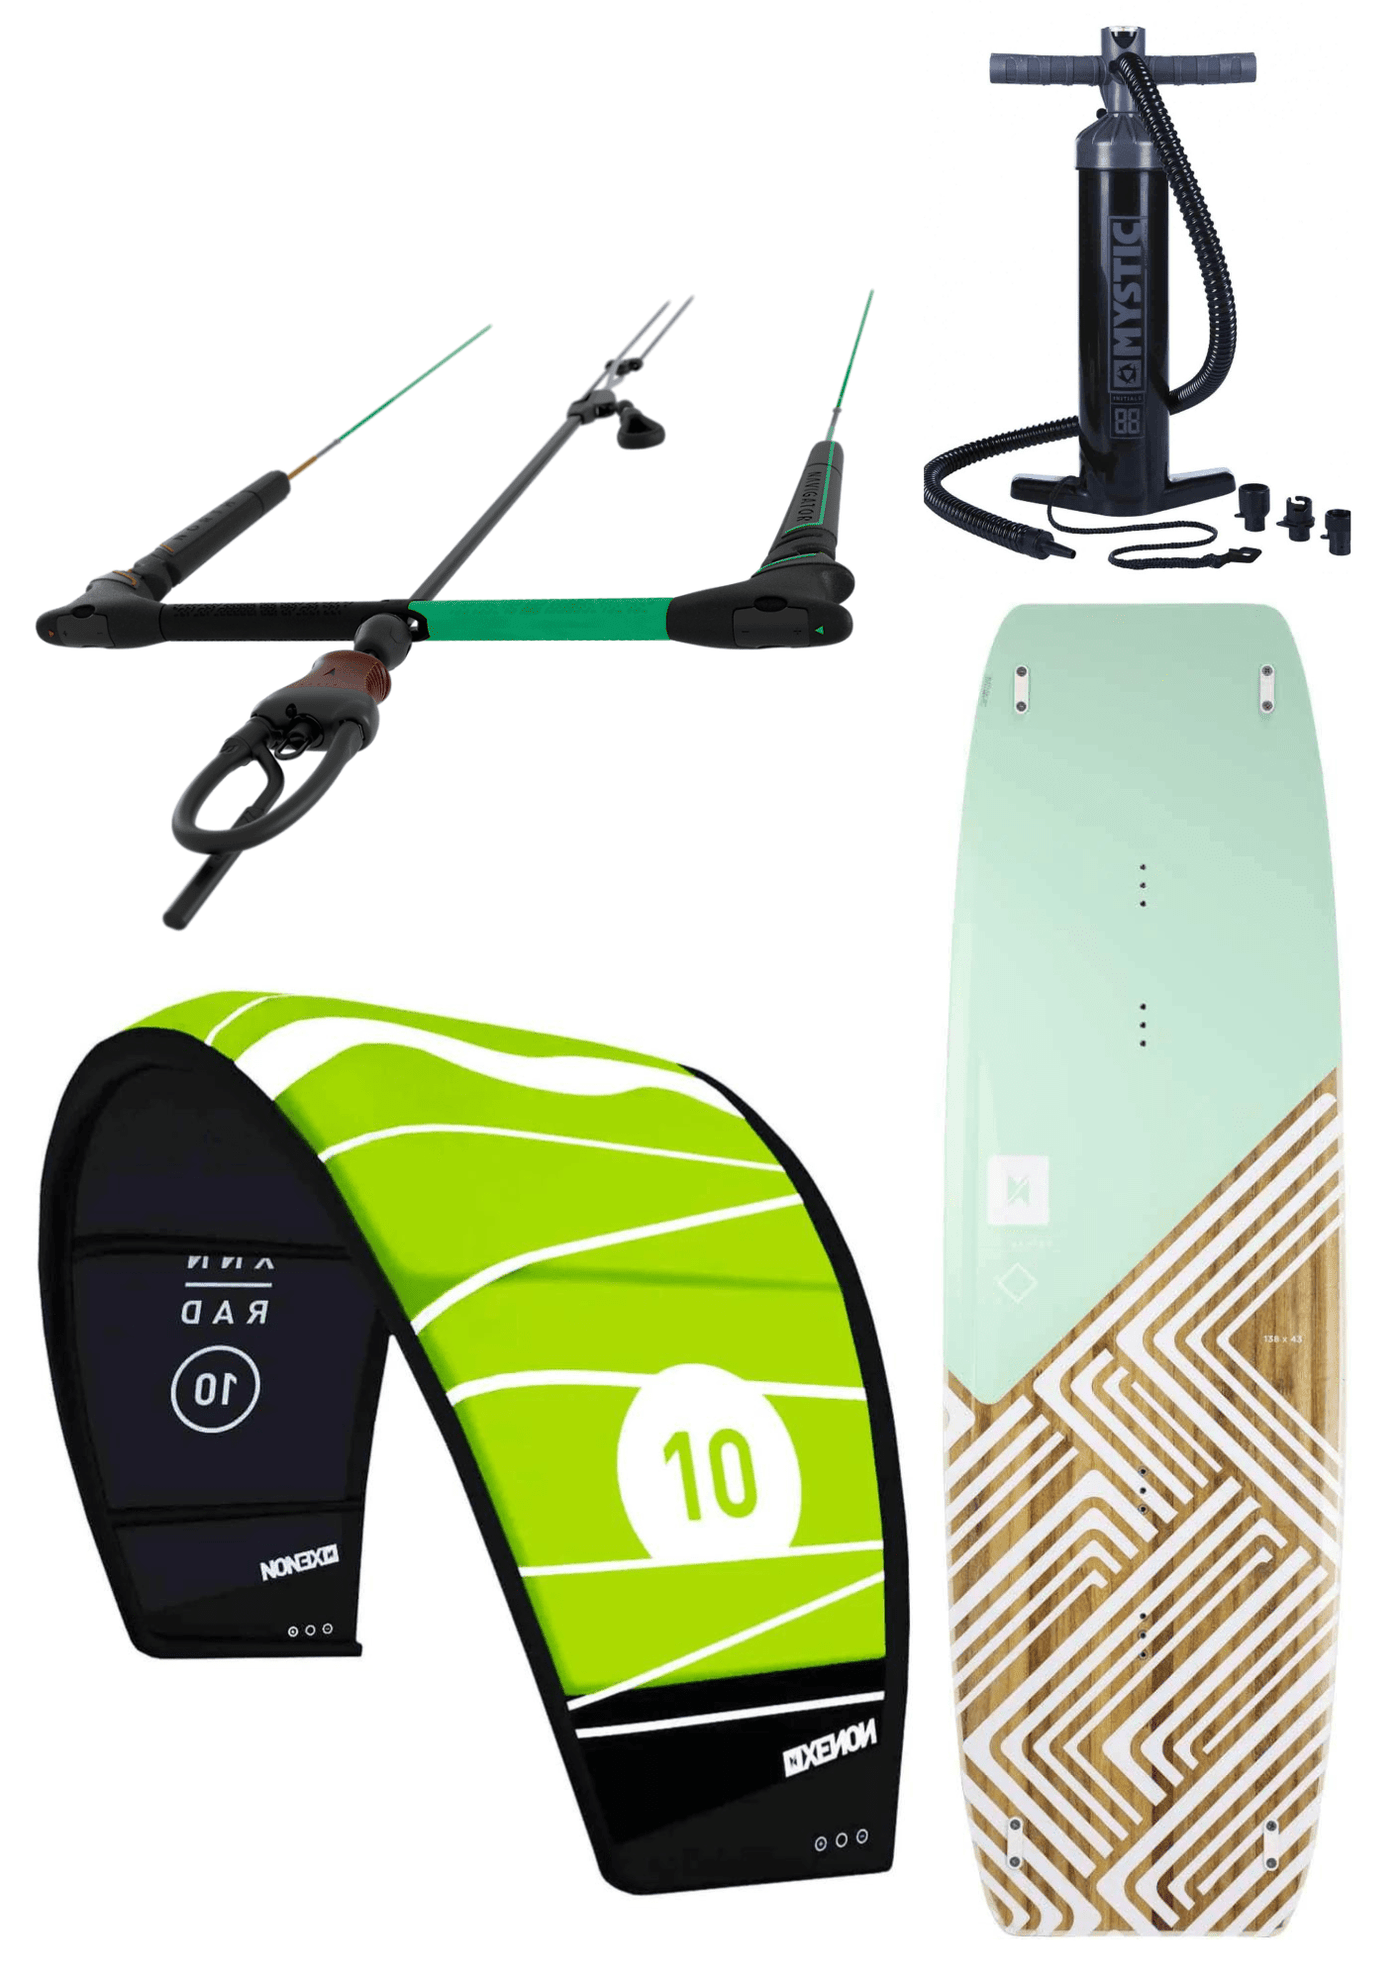 Xenon Freestyle Kite Package surface2airsports